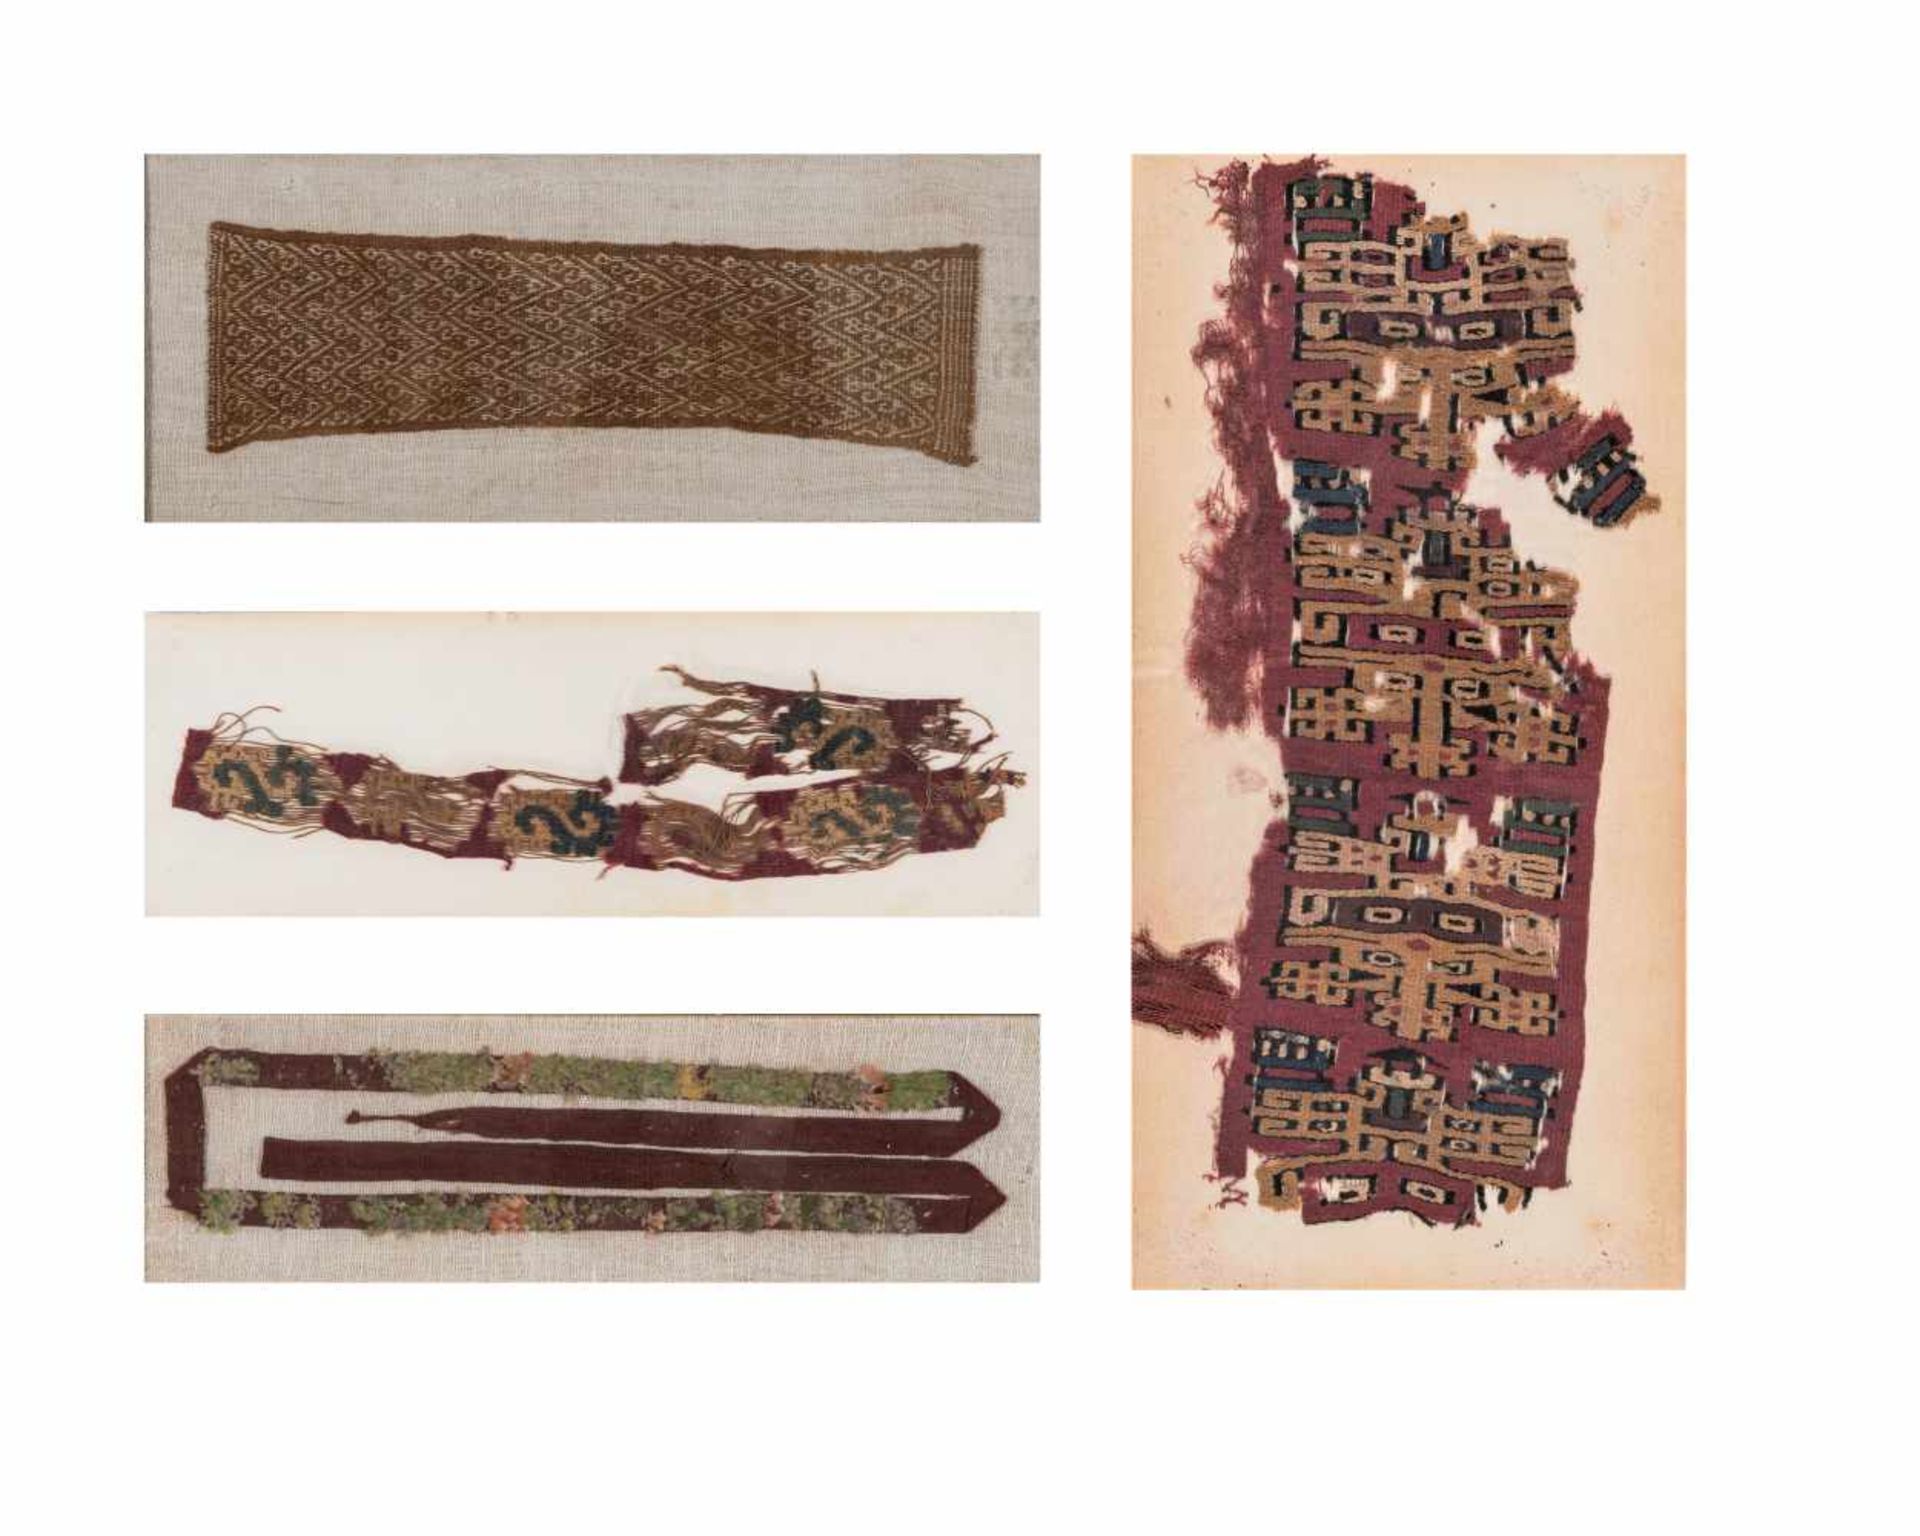 3 TEXTILE FRAGMENTS AND 1 BAND – NAZCA AND CHANCAY CULTUREWoven FabricNazca culture, Peru, c. 100 BC